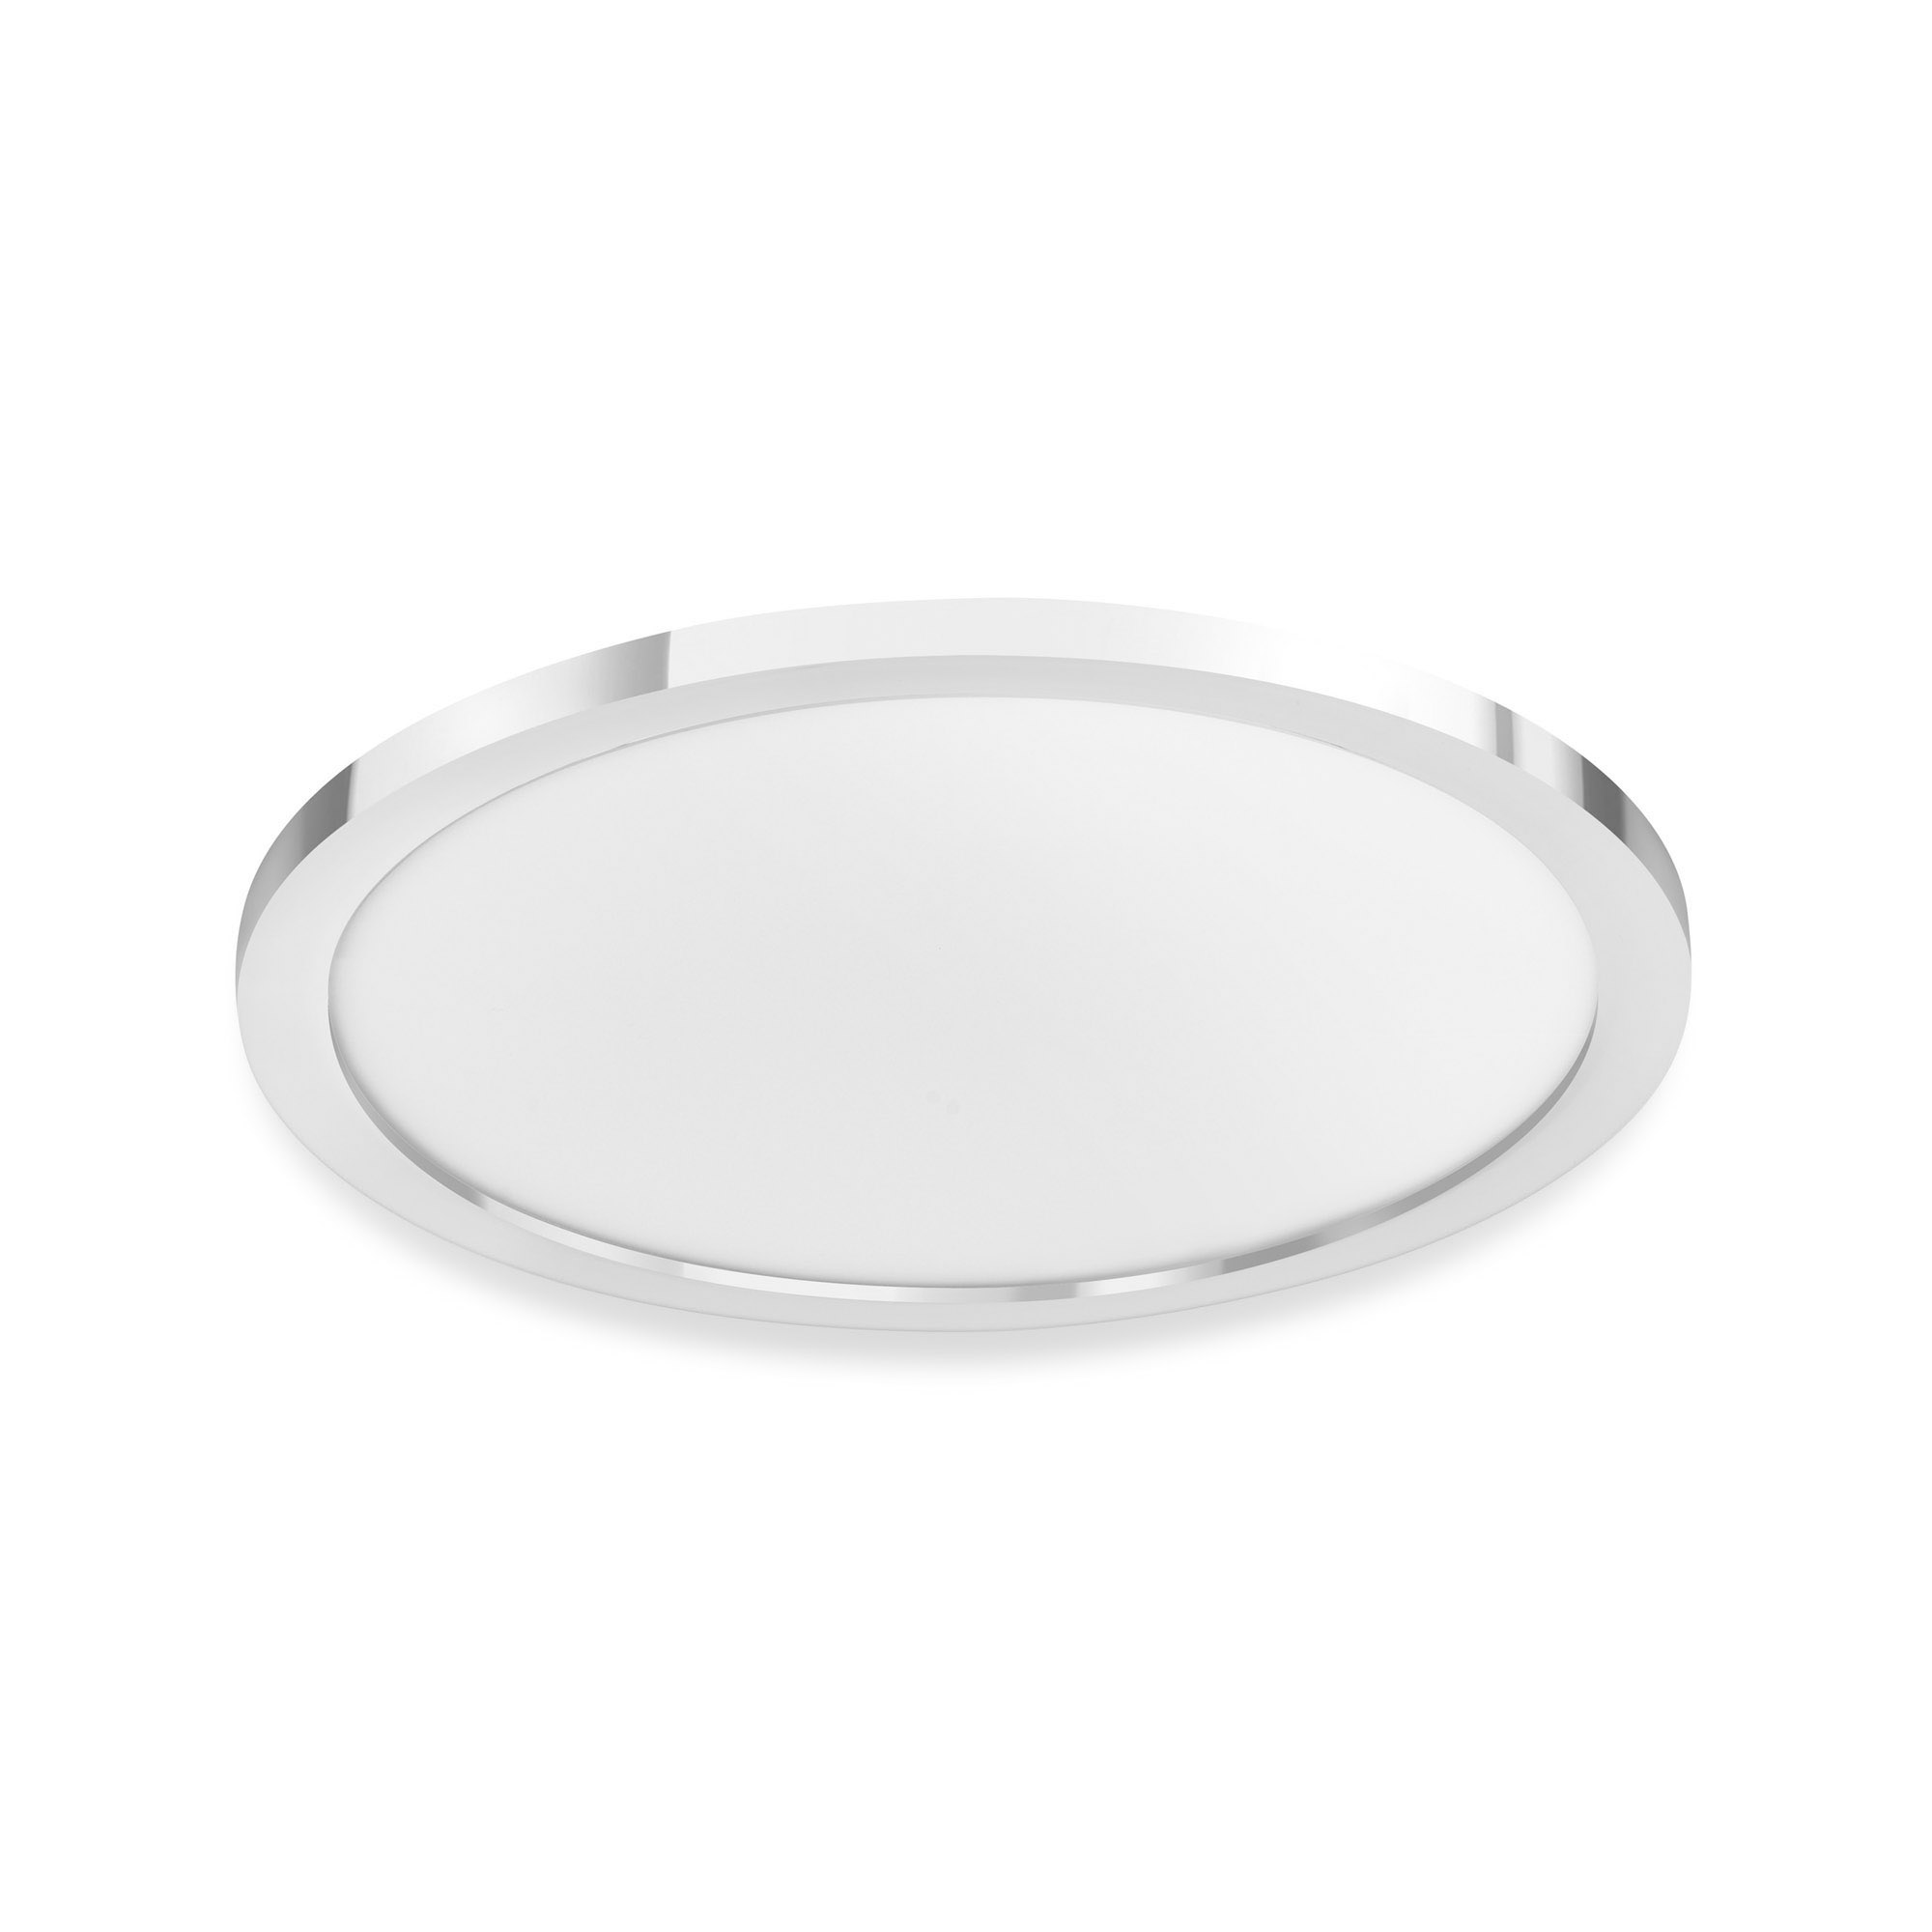 LEDVANCE SMART+ WiFi Tunable White LED Ceiling Light Disc 300mm IP44 silver 2100lm